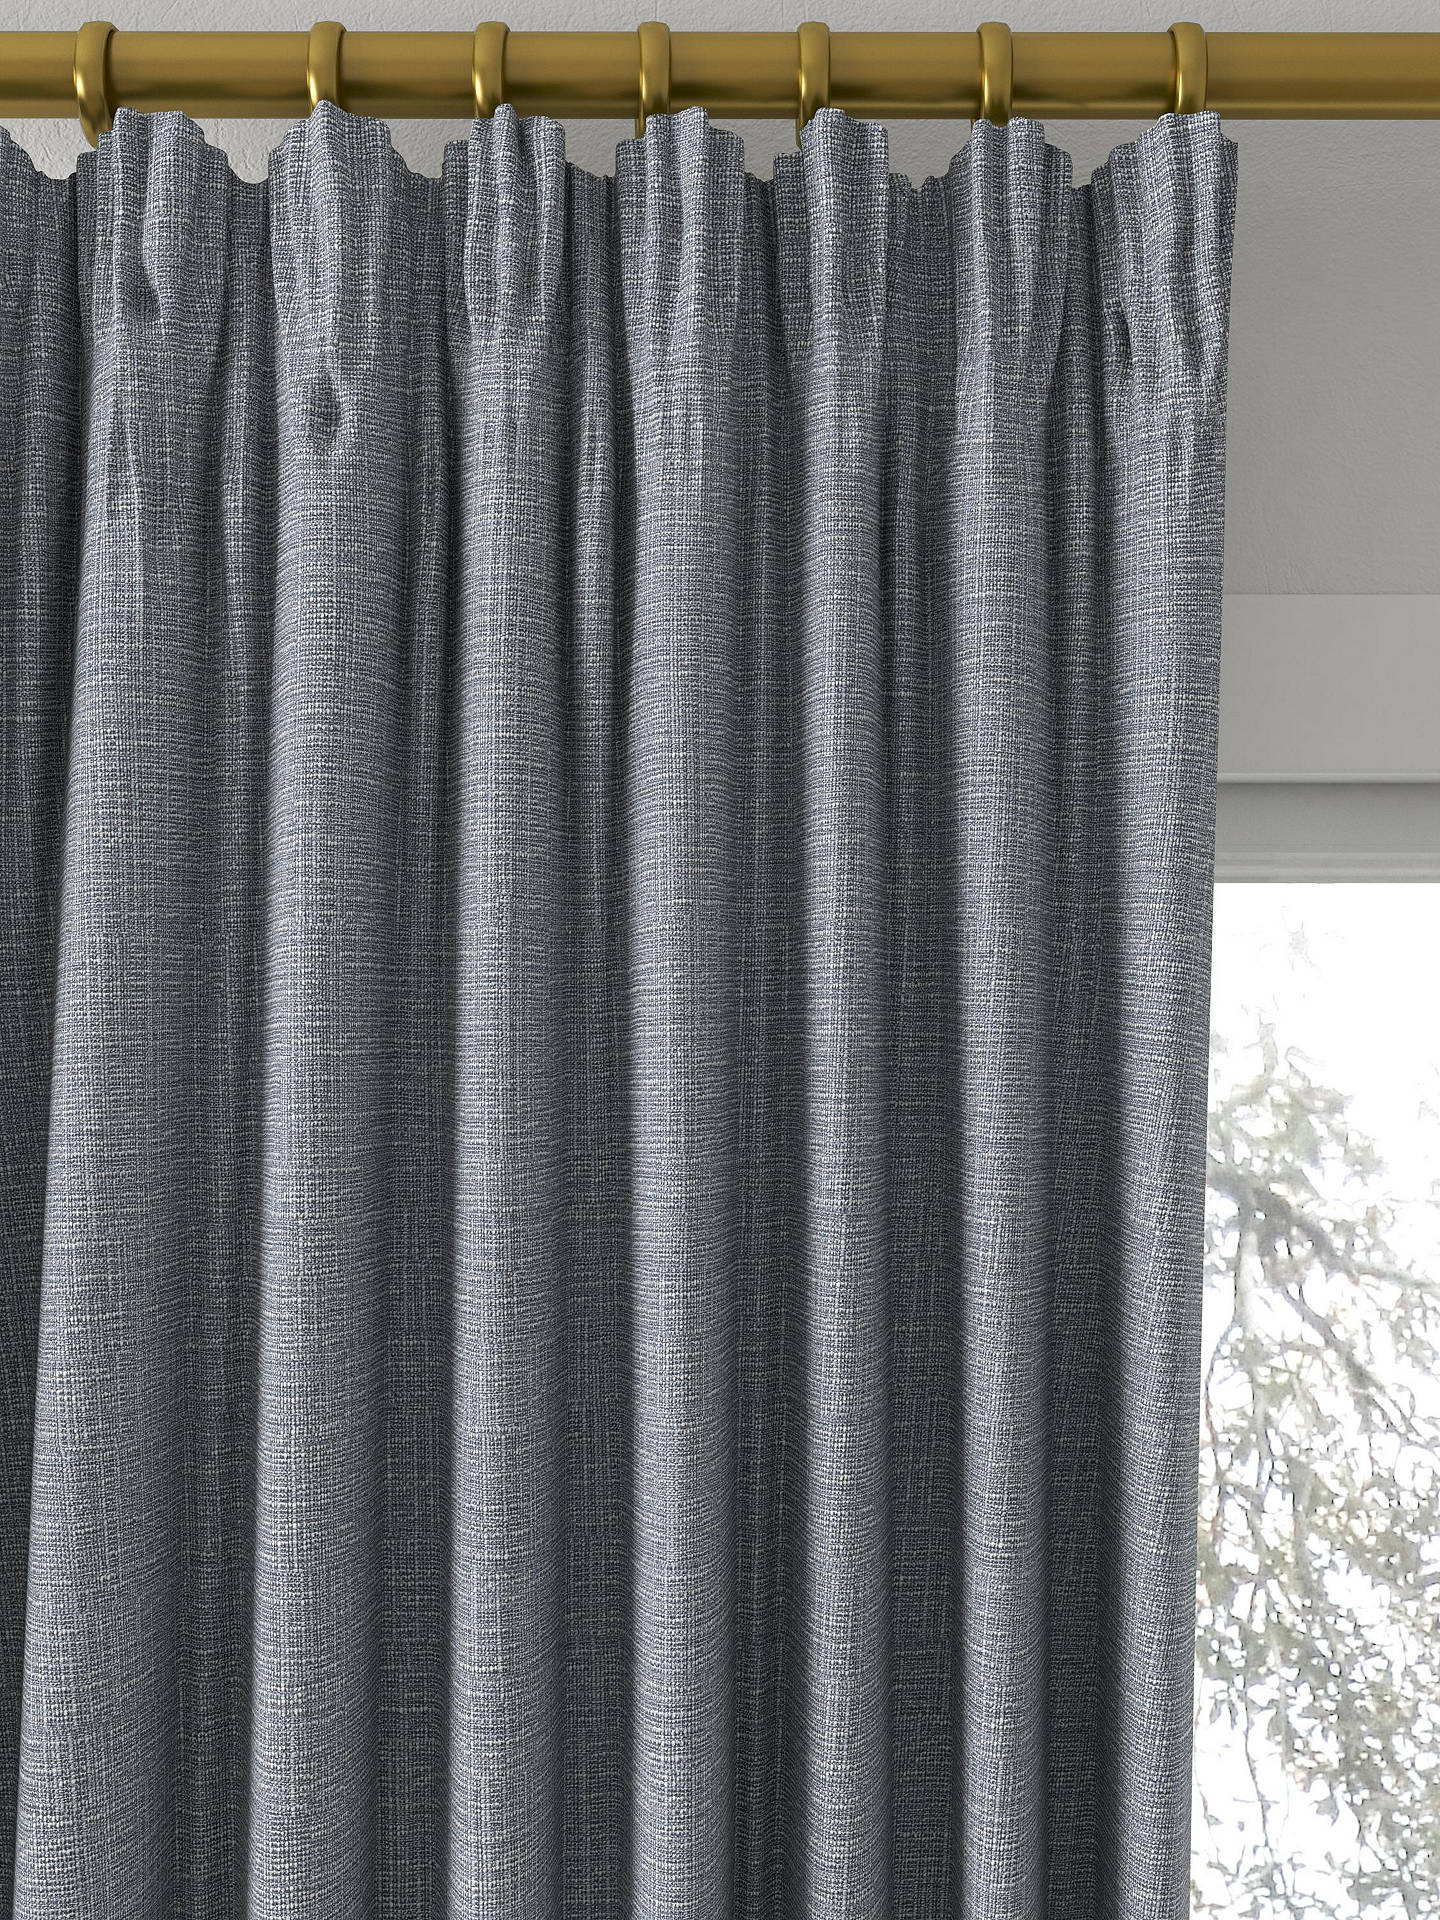 Designers Guild Tangalle Made to Measure Curtains, Slate